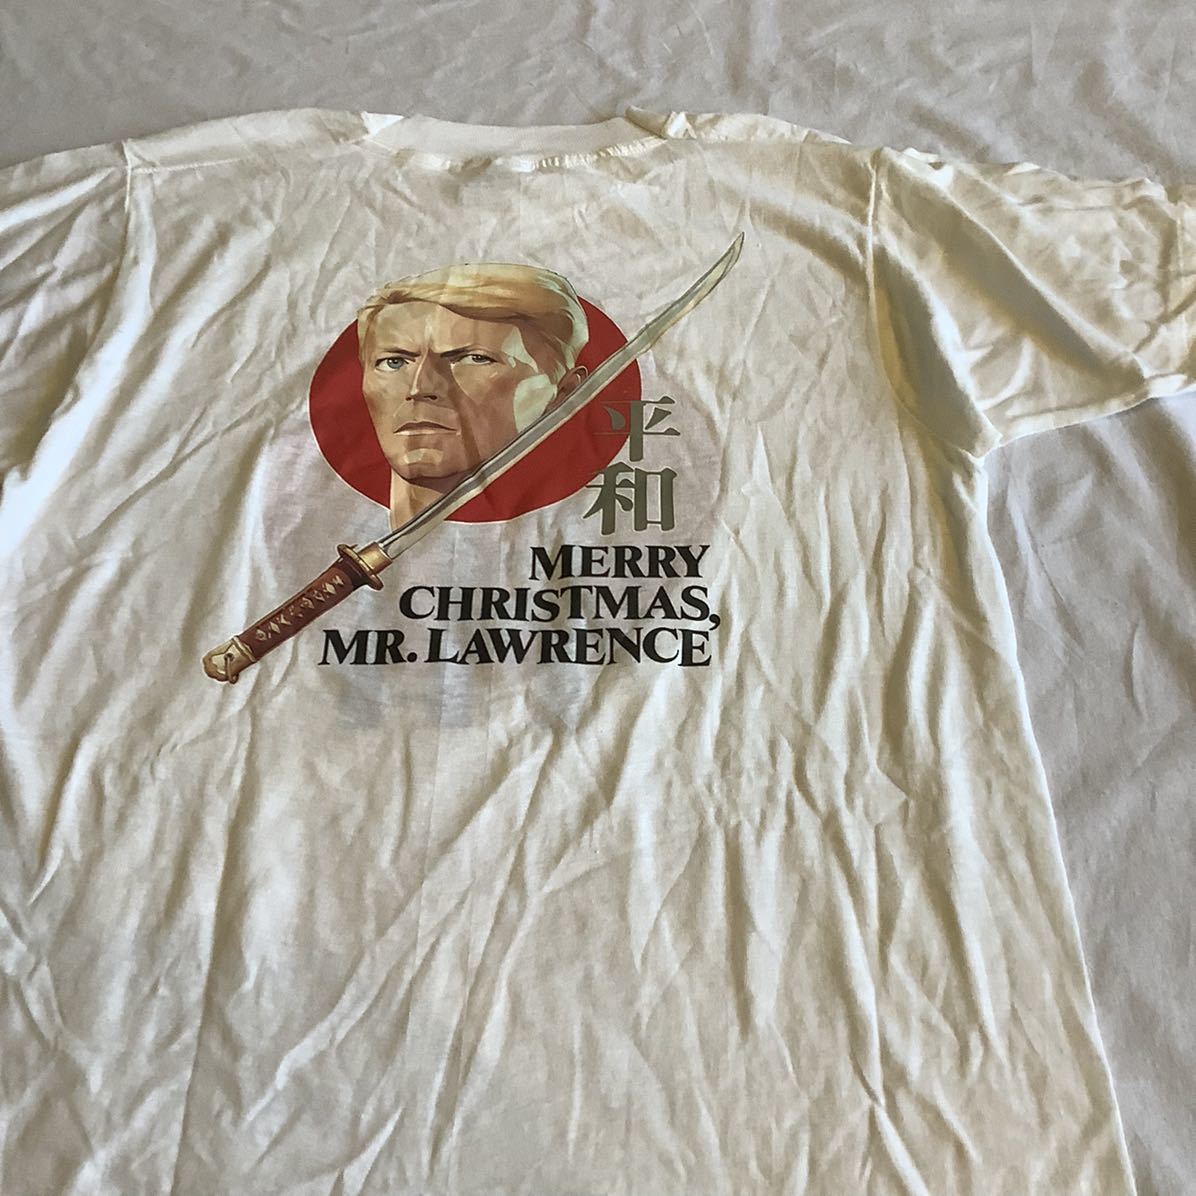  ultra rare! 1983 year at that time mono war place. me Lee Christmas Vintage T-shirt movie Movie Ooshima . north .. debit bow i Sakamoto Ryuichi 80s 90s